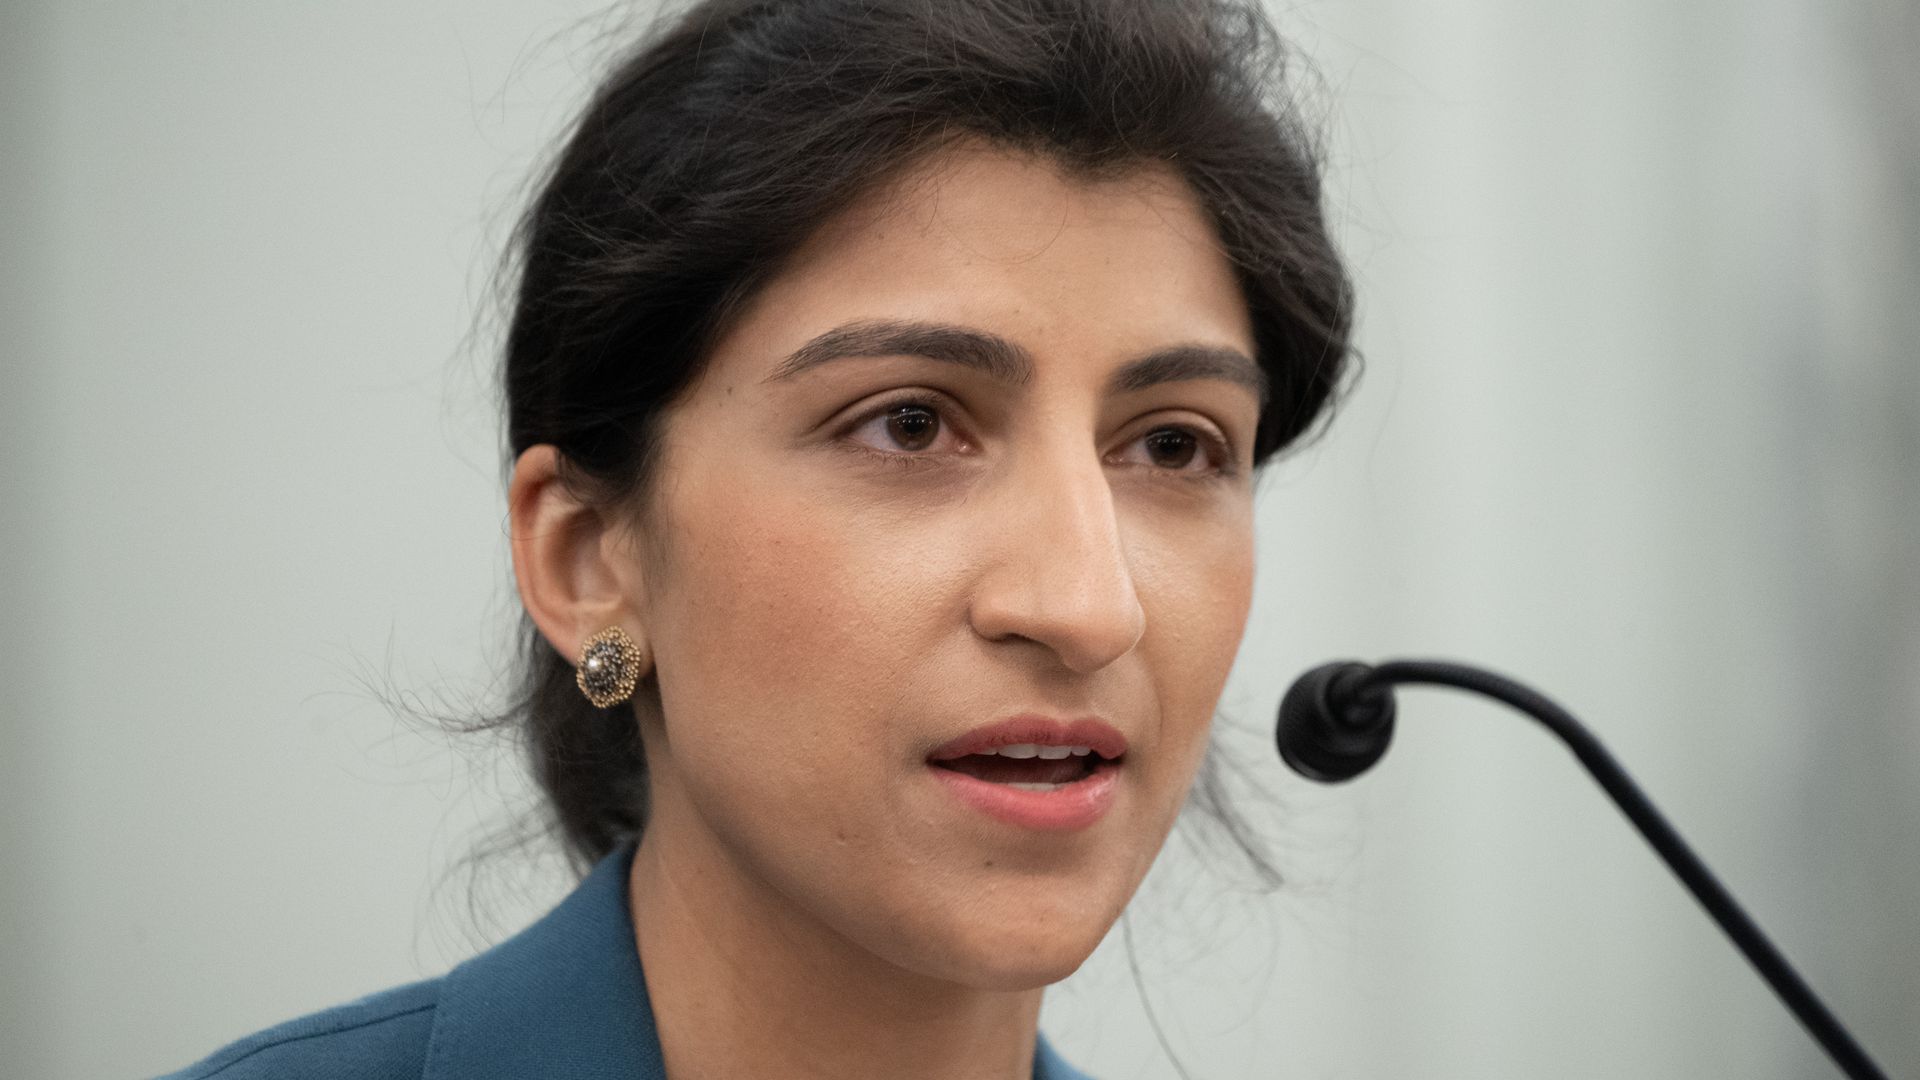 Lina Khan, chair of the Federal Trade Commission, appears before Congress